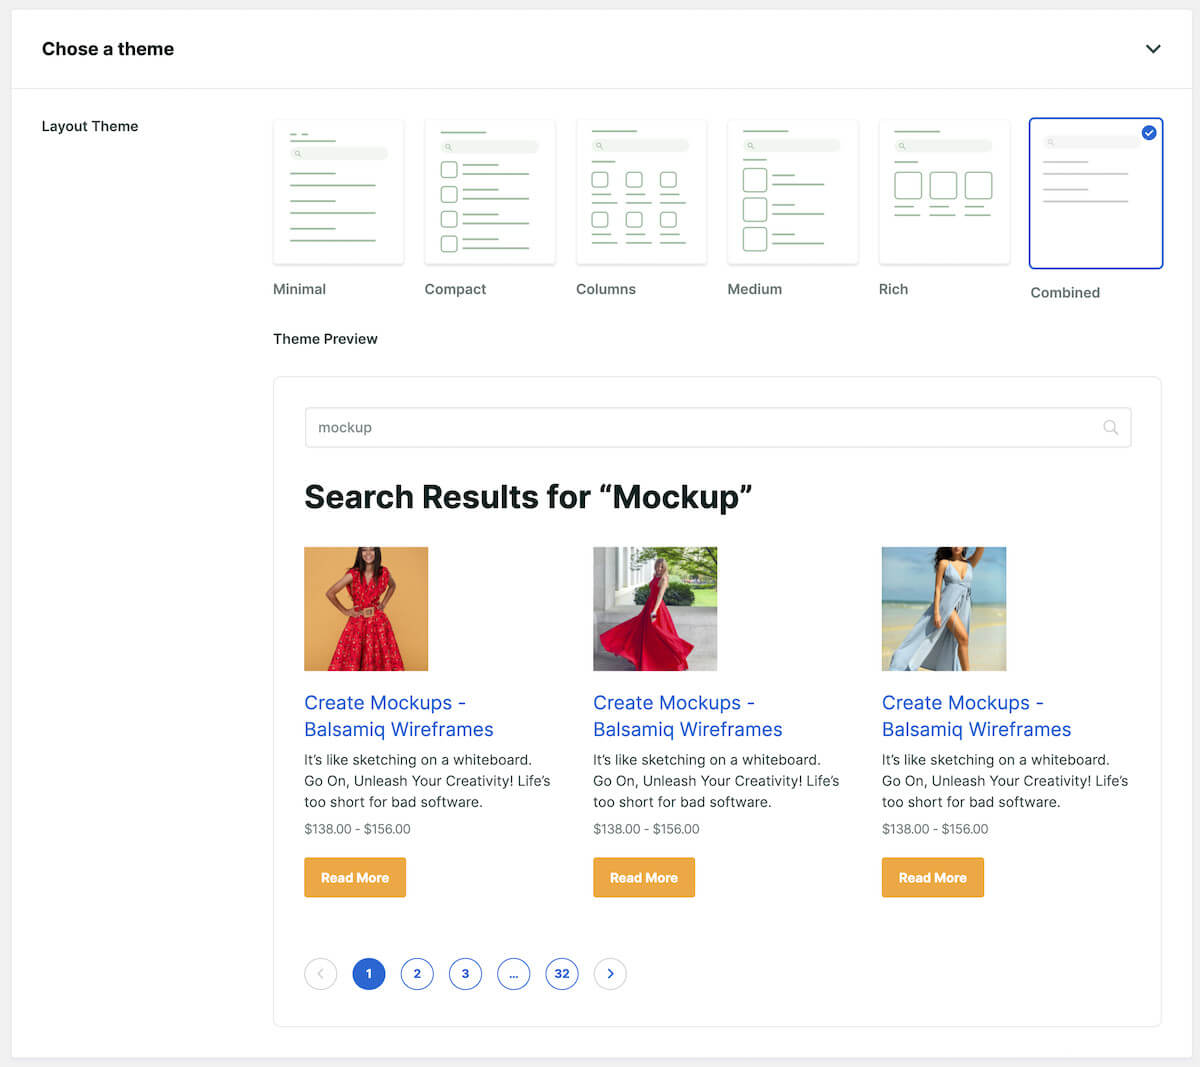 pre-designed theme layouts for search results page